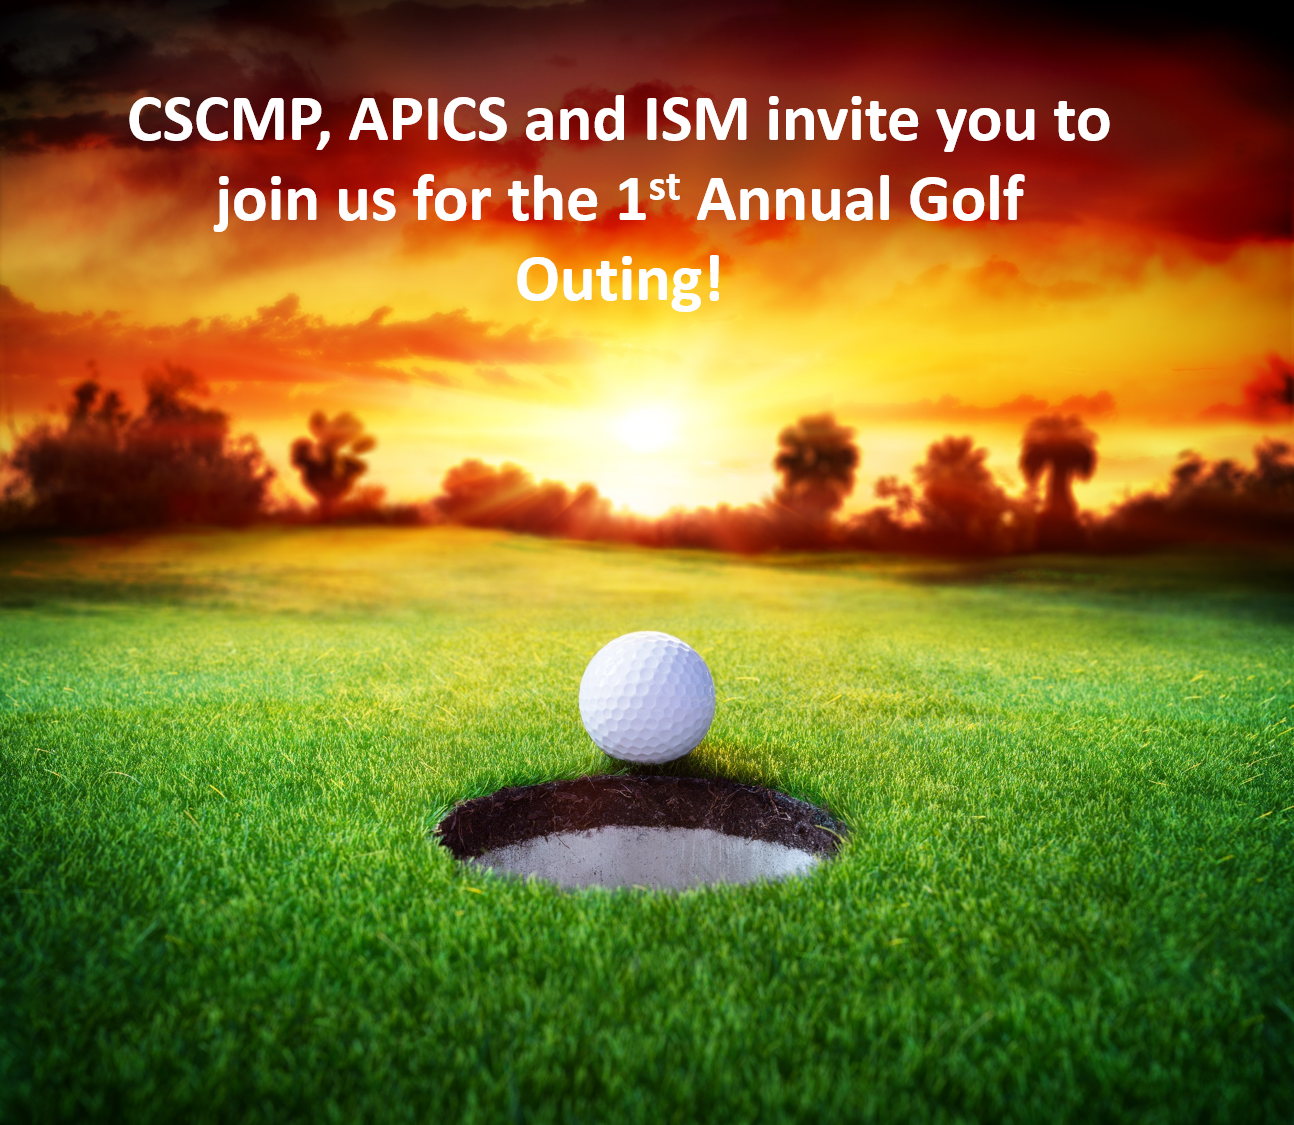 2nd Annual ISM – APICS - CSCMP - Southeast Michigan Golf Outing